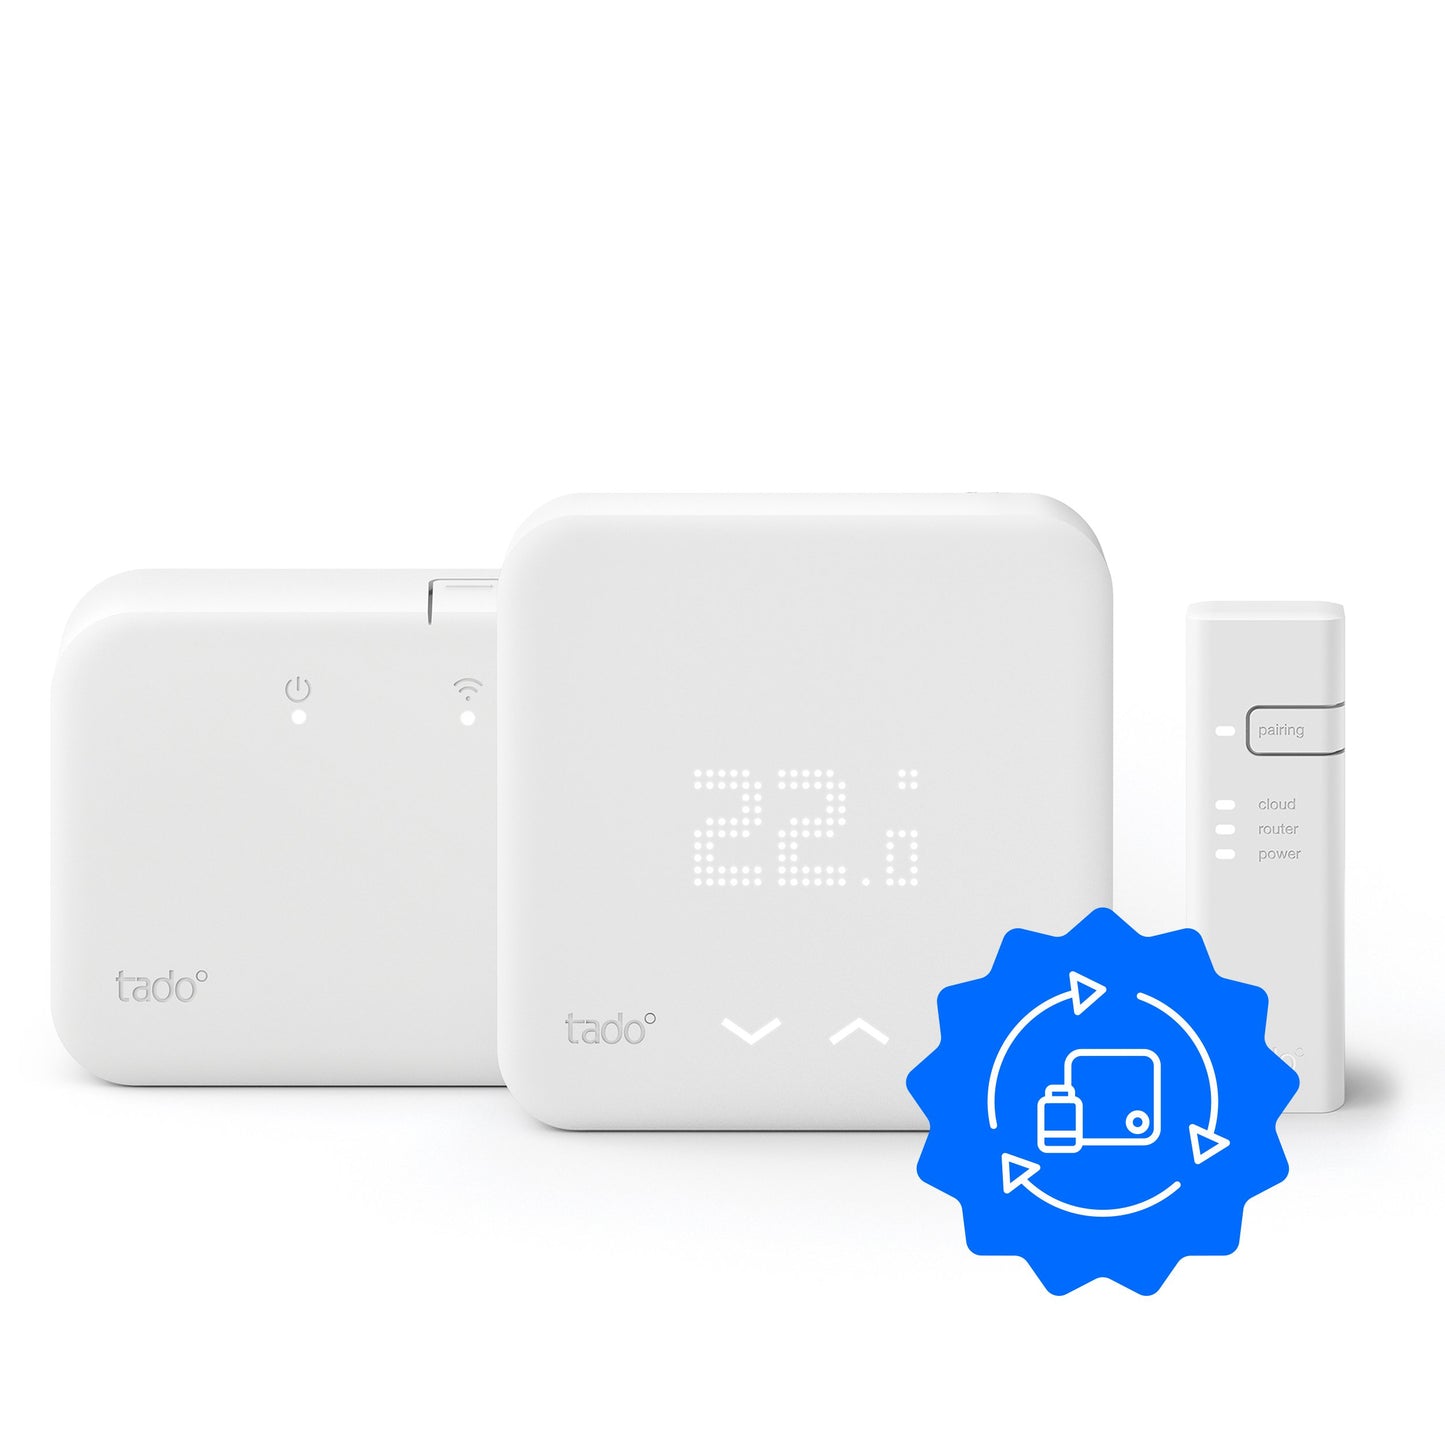 Factory refurbished: Wireless Smart Thermostat Starter Kit V3+  with Hot Water